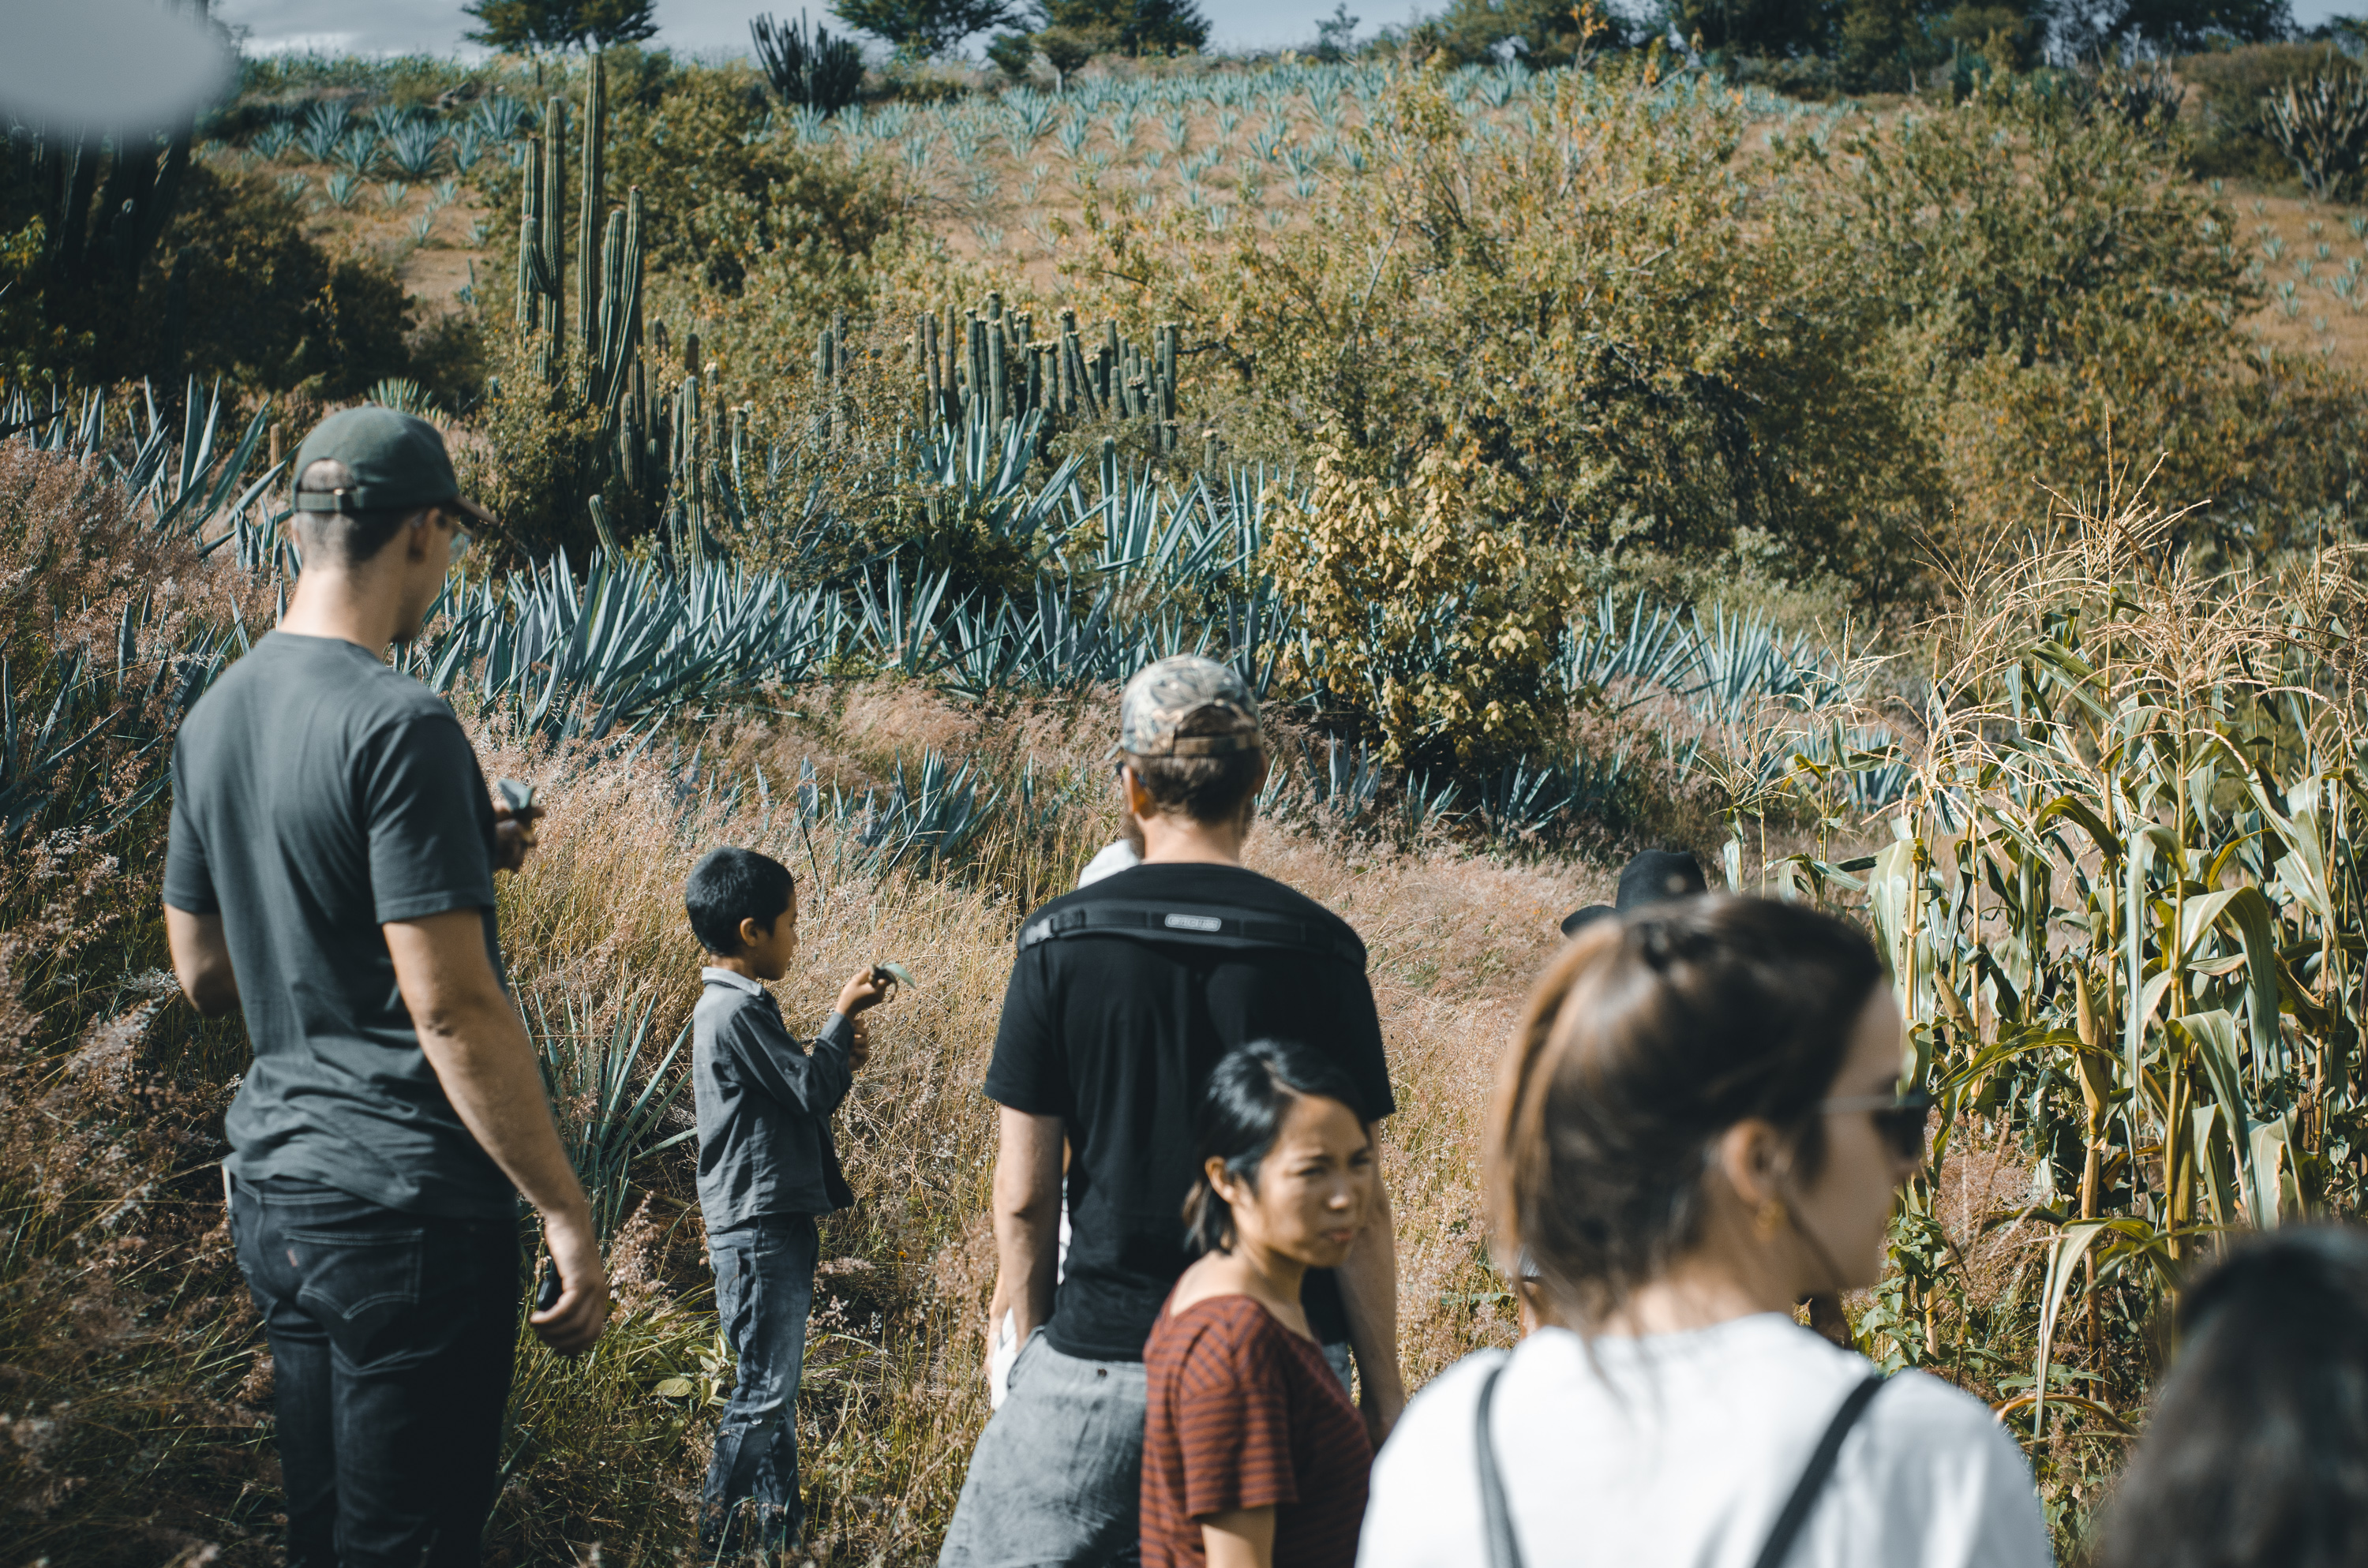 Oasis of mezcal: reforestation, water harvesting and agave cultivation in Oaxaca´s Valles Centrales